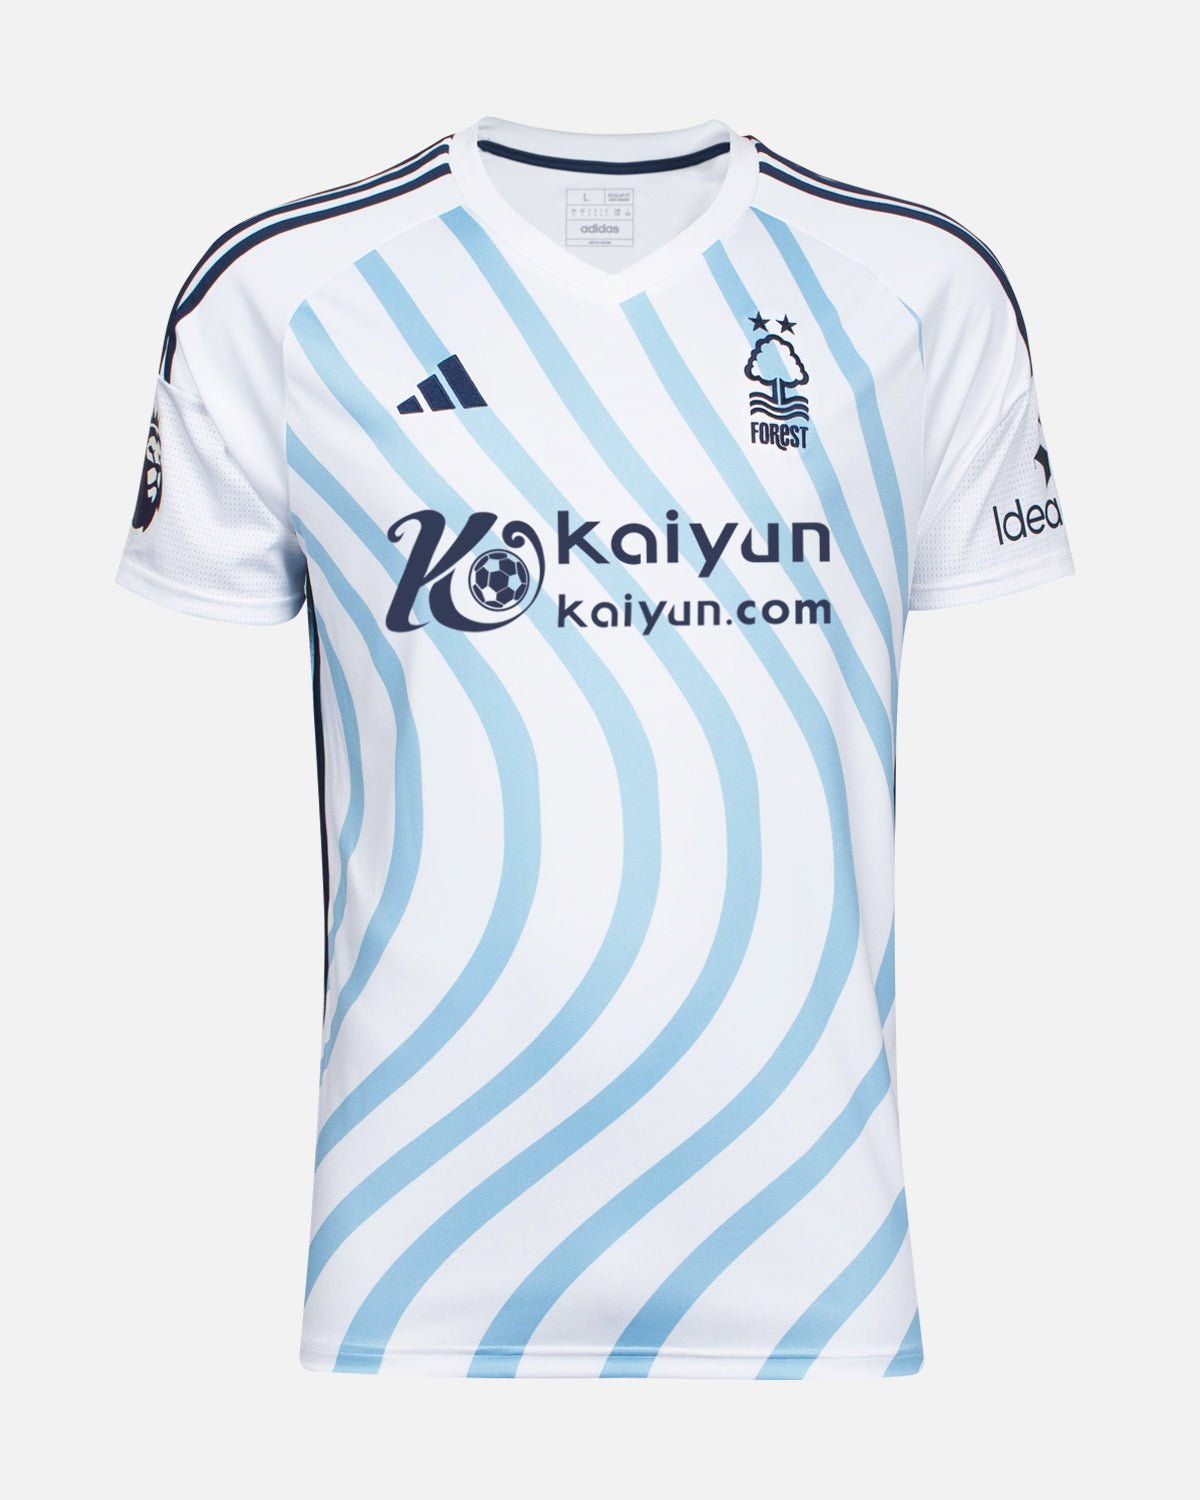 NFFC Away Shirt 23-24 - Boly 30 - Nottingham Forest FC